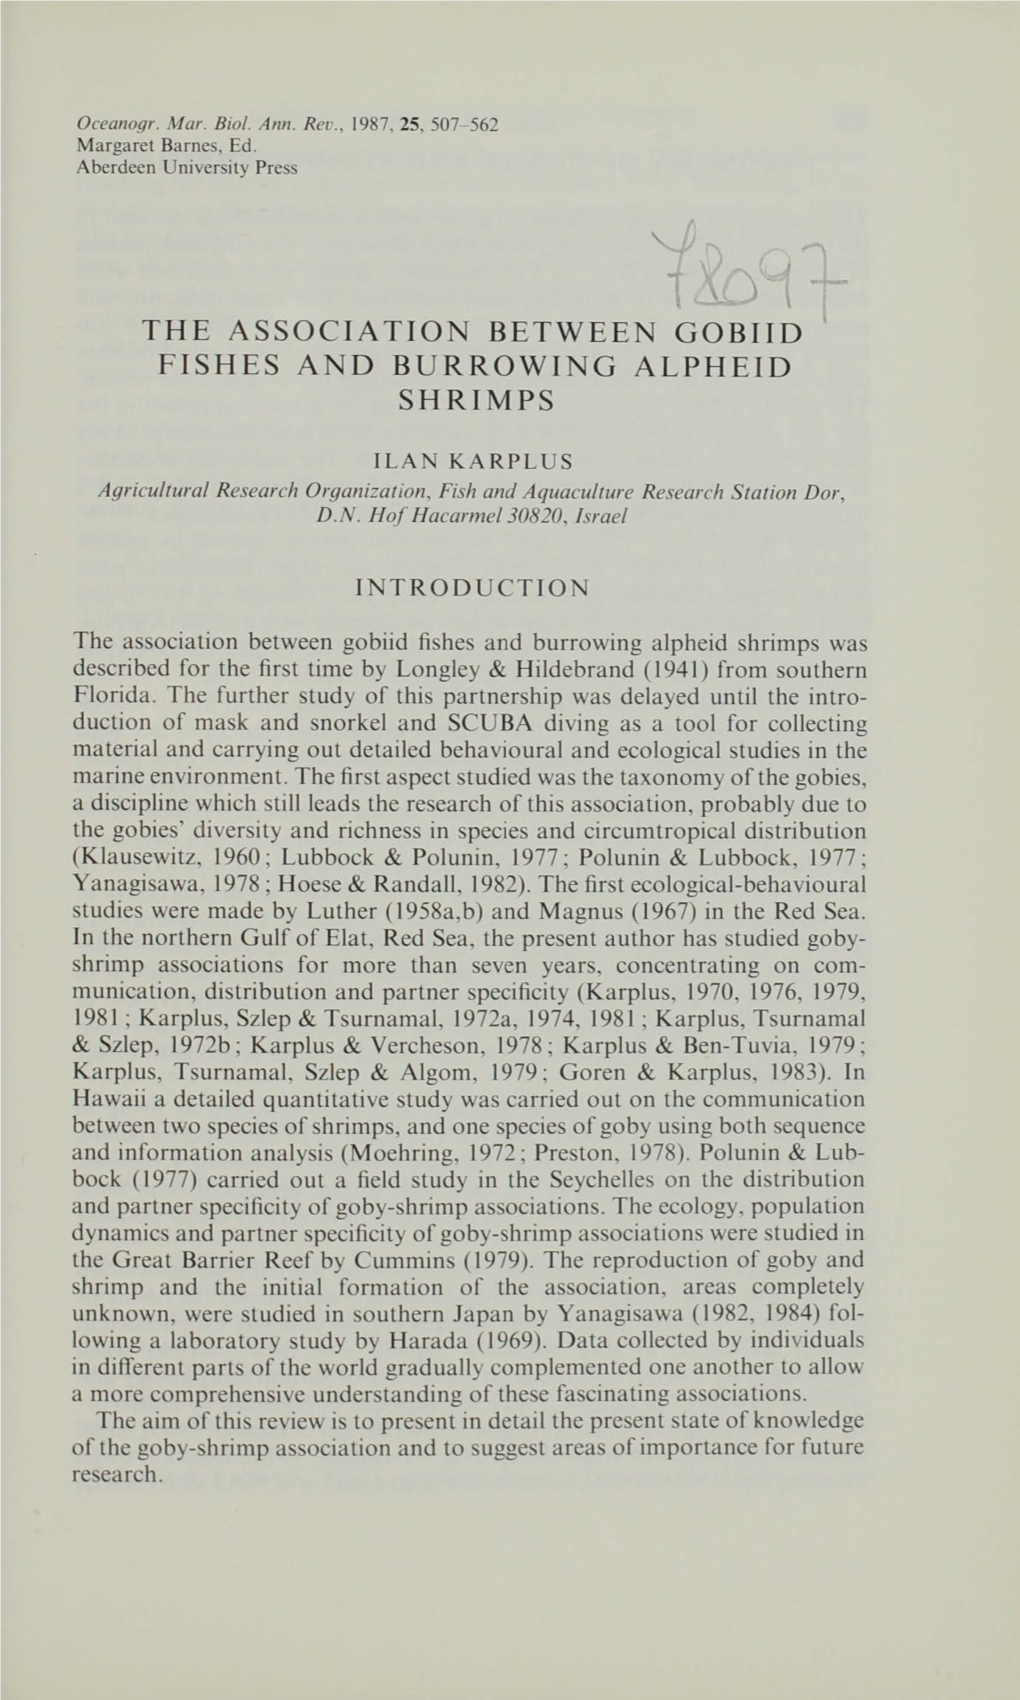 The Association Between Gobiid Fishes and Burrowing Alpheid Shrimps